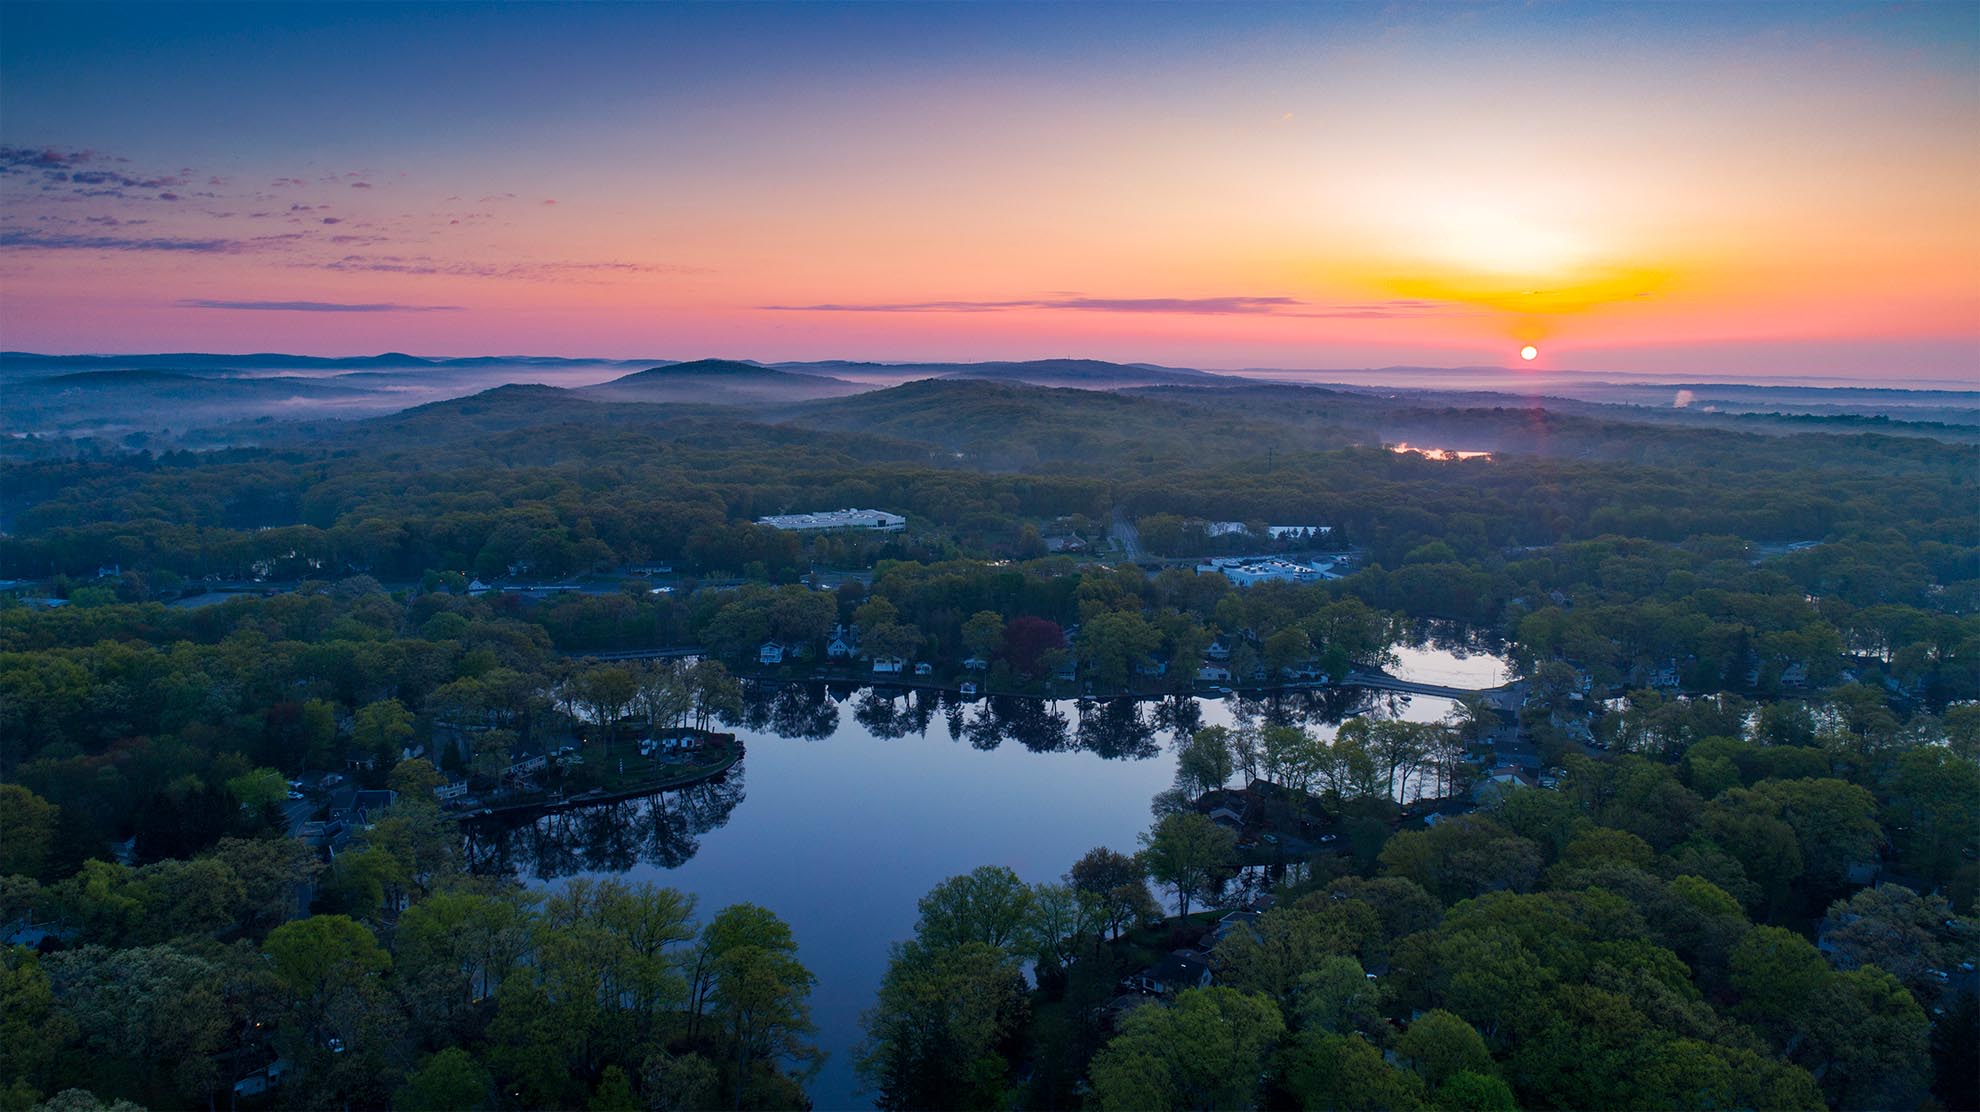 Photograph of sunrise over Rainbow Lakes NJ taken with a drone